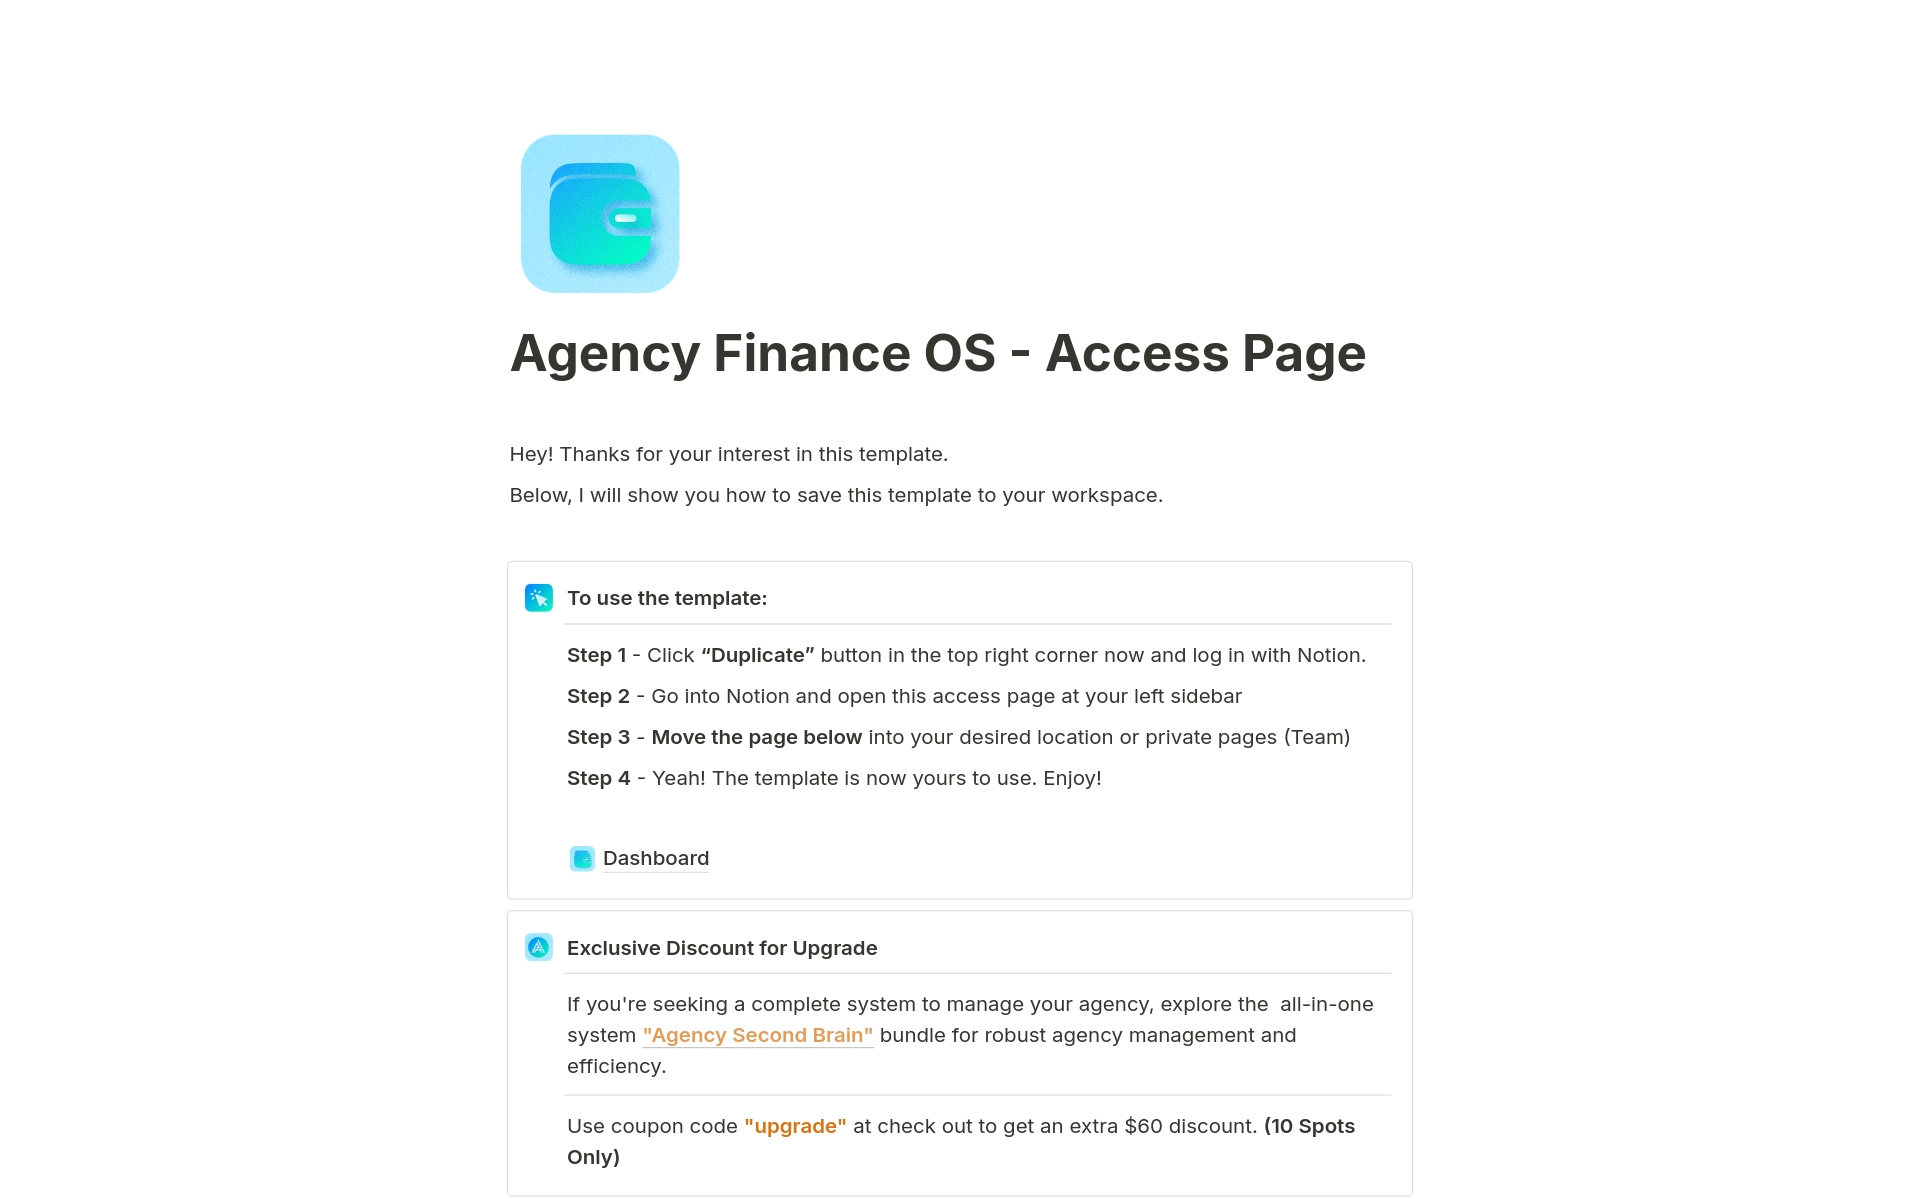 Agency Finance OS brings simplicity and precision to your financial data, enabling clear, quick, and confident decision-making.